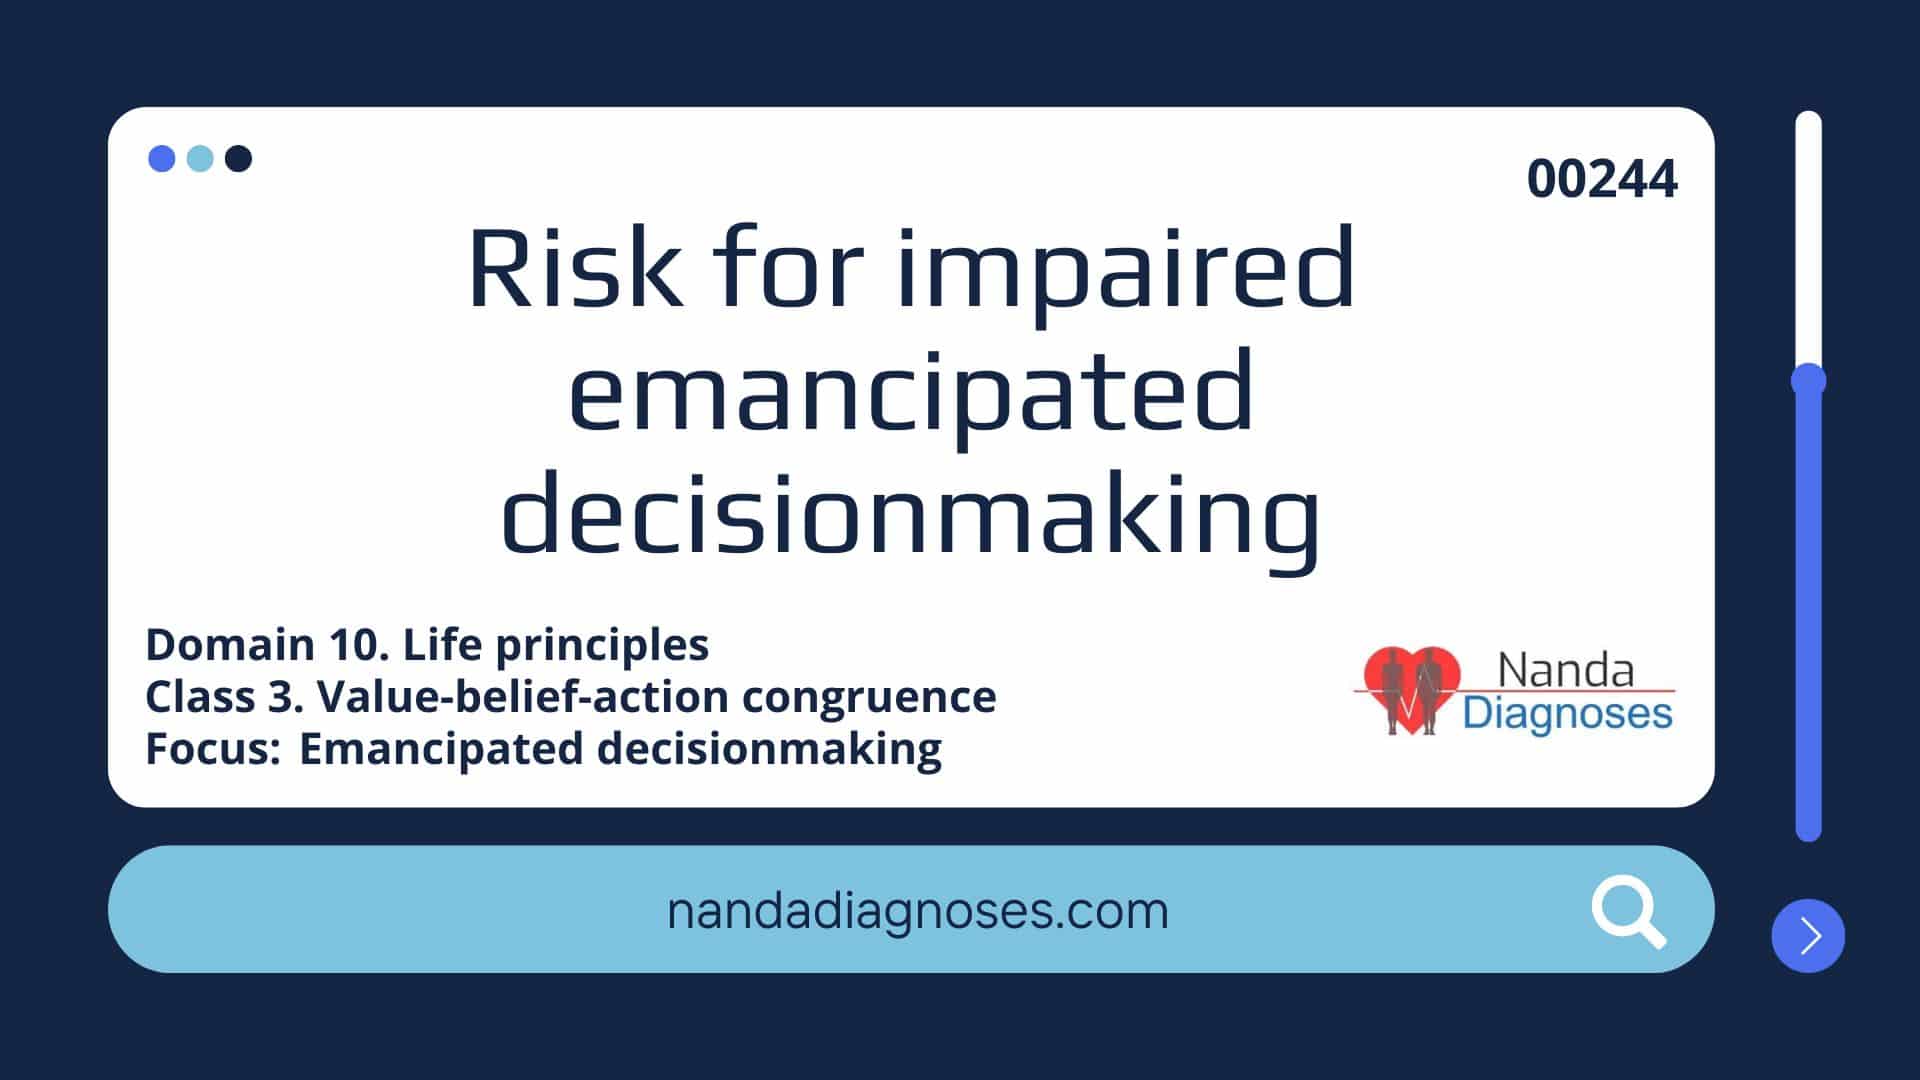 Risk for impaired emancipated decisionmaking